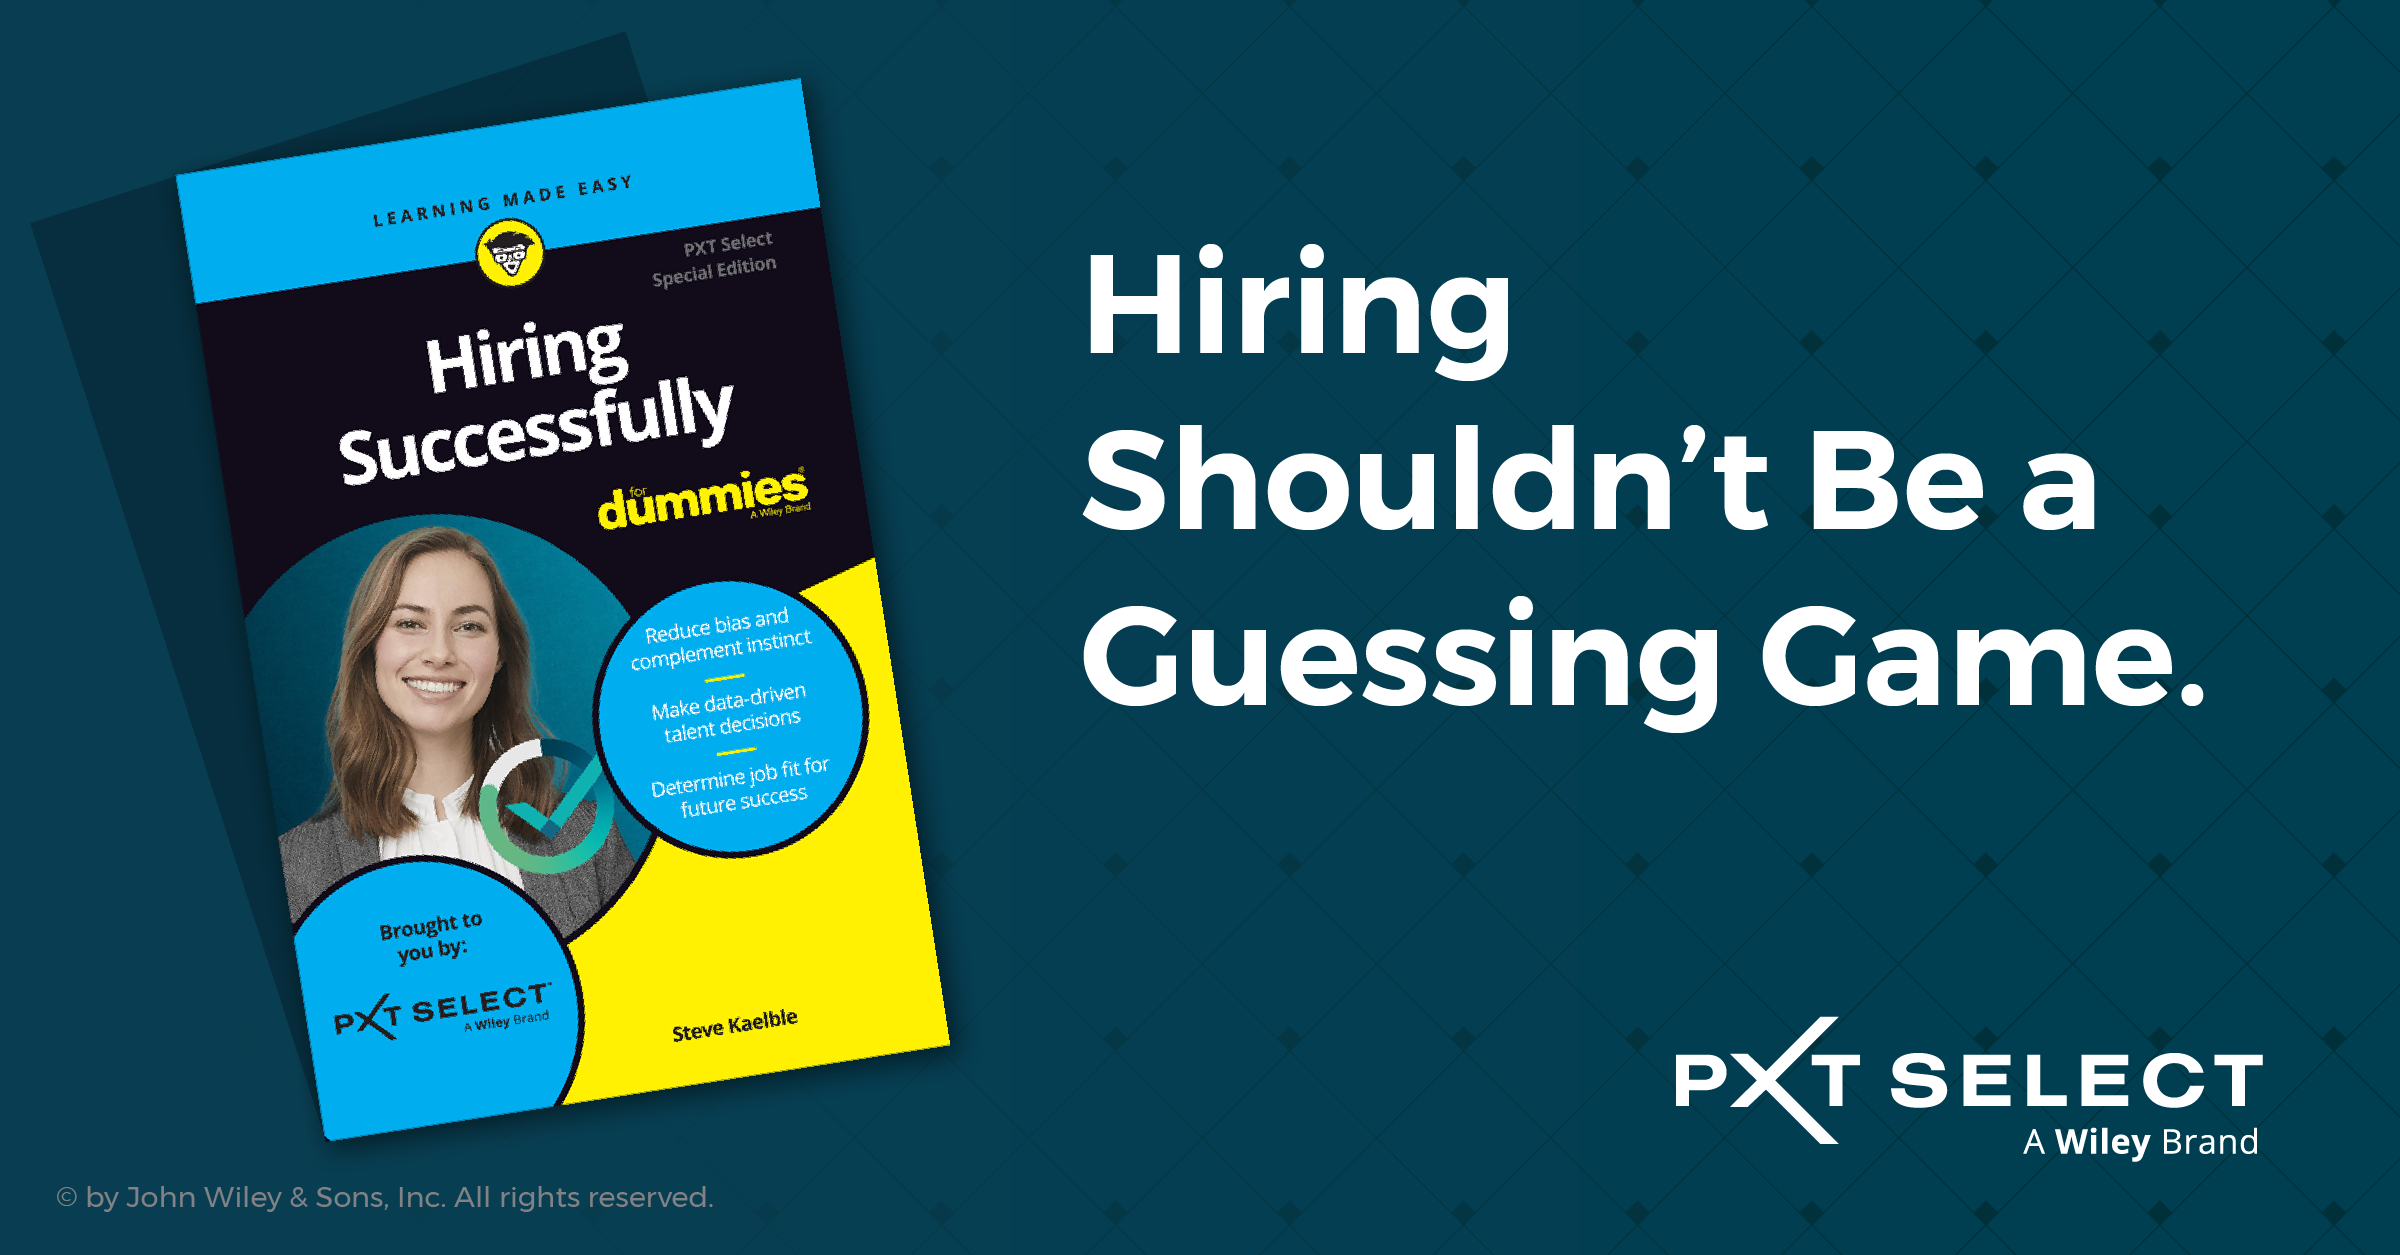 Featured image for “Hiring Successfully For Dummies, PXT Select™ Special Edition”